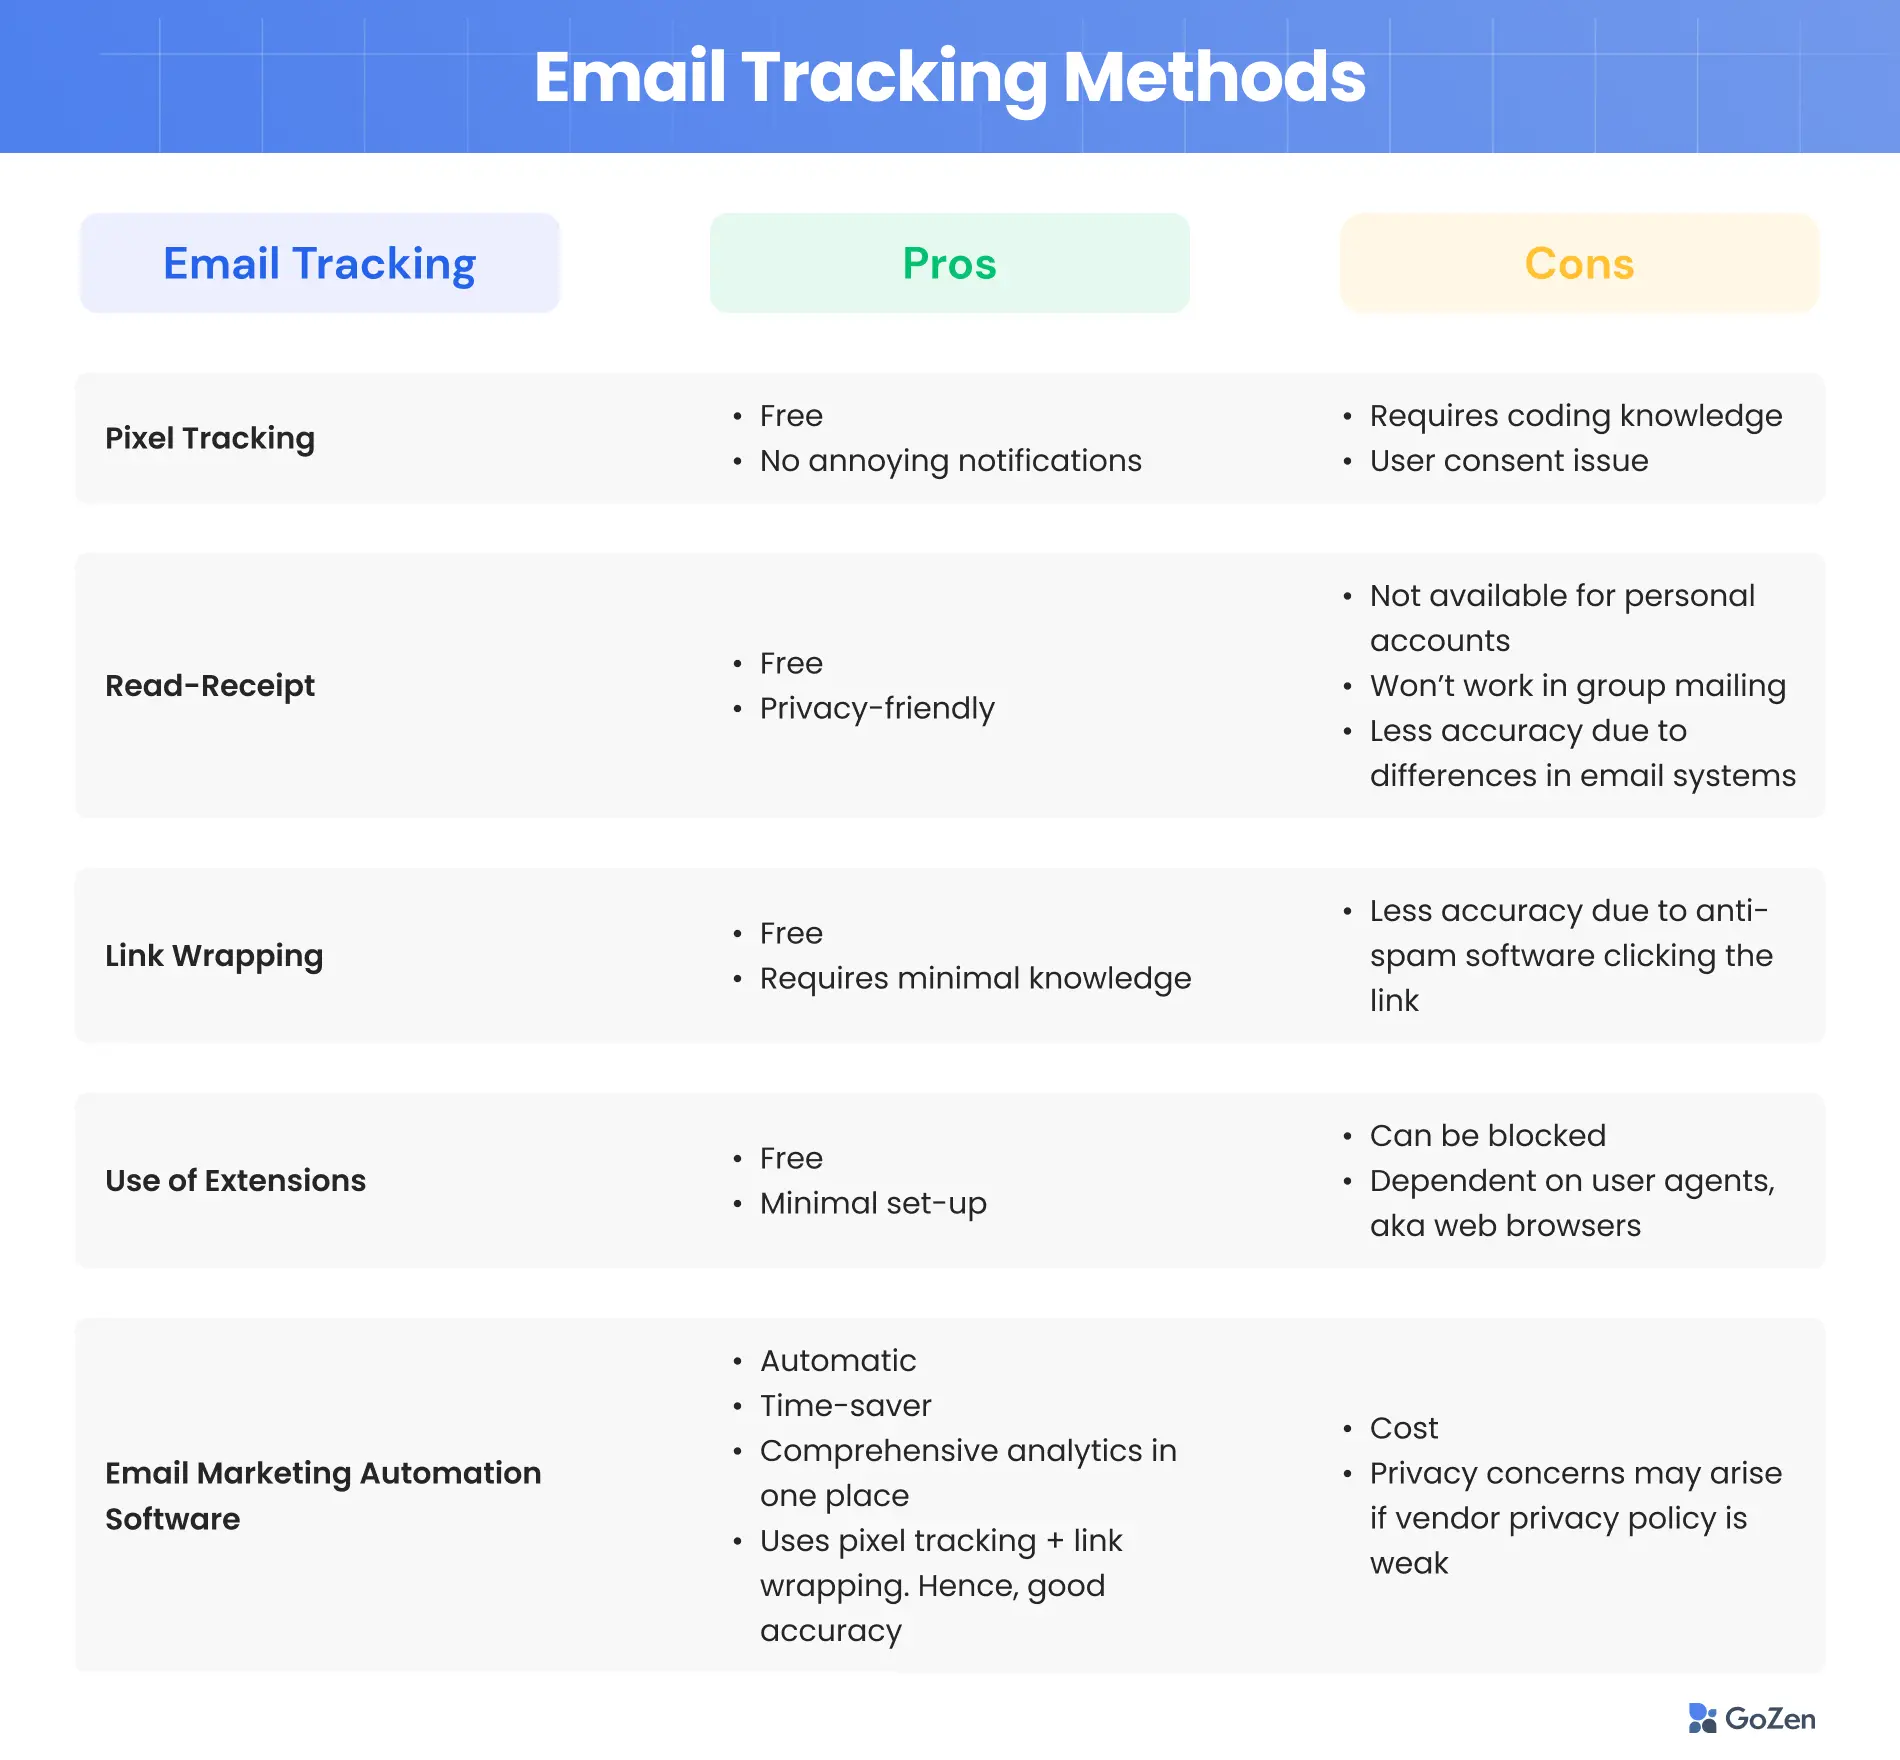 Email tracking methods